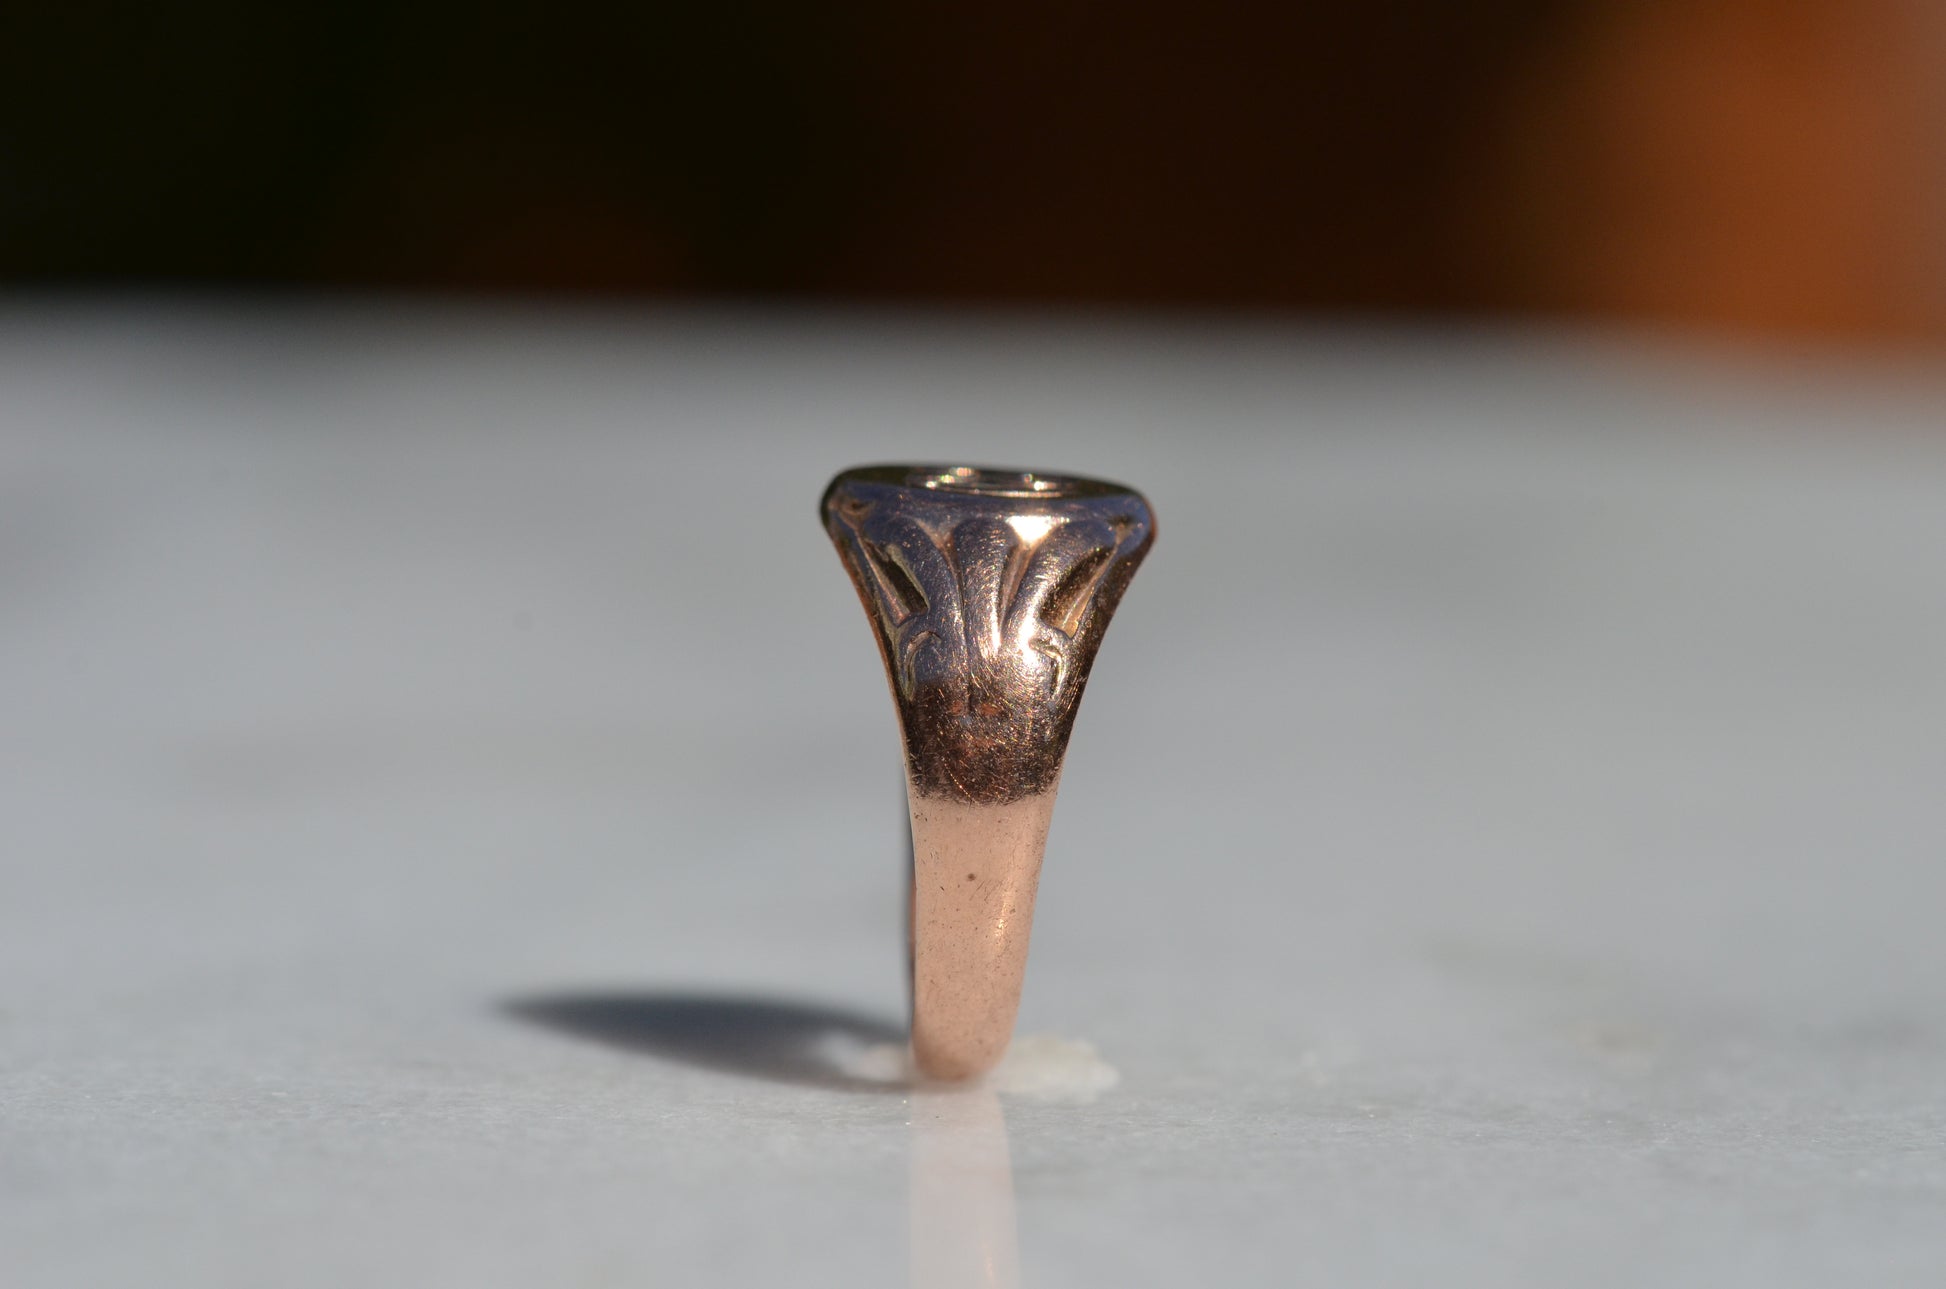 The ring is positioned upright and viewed in profile.